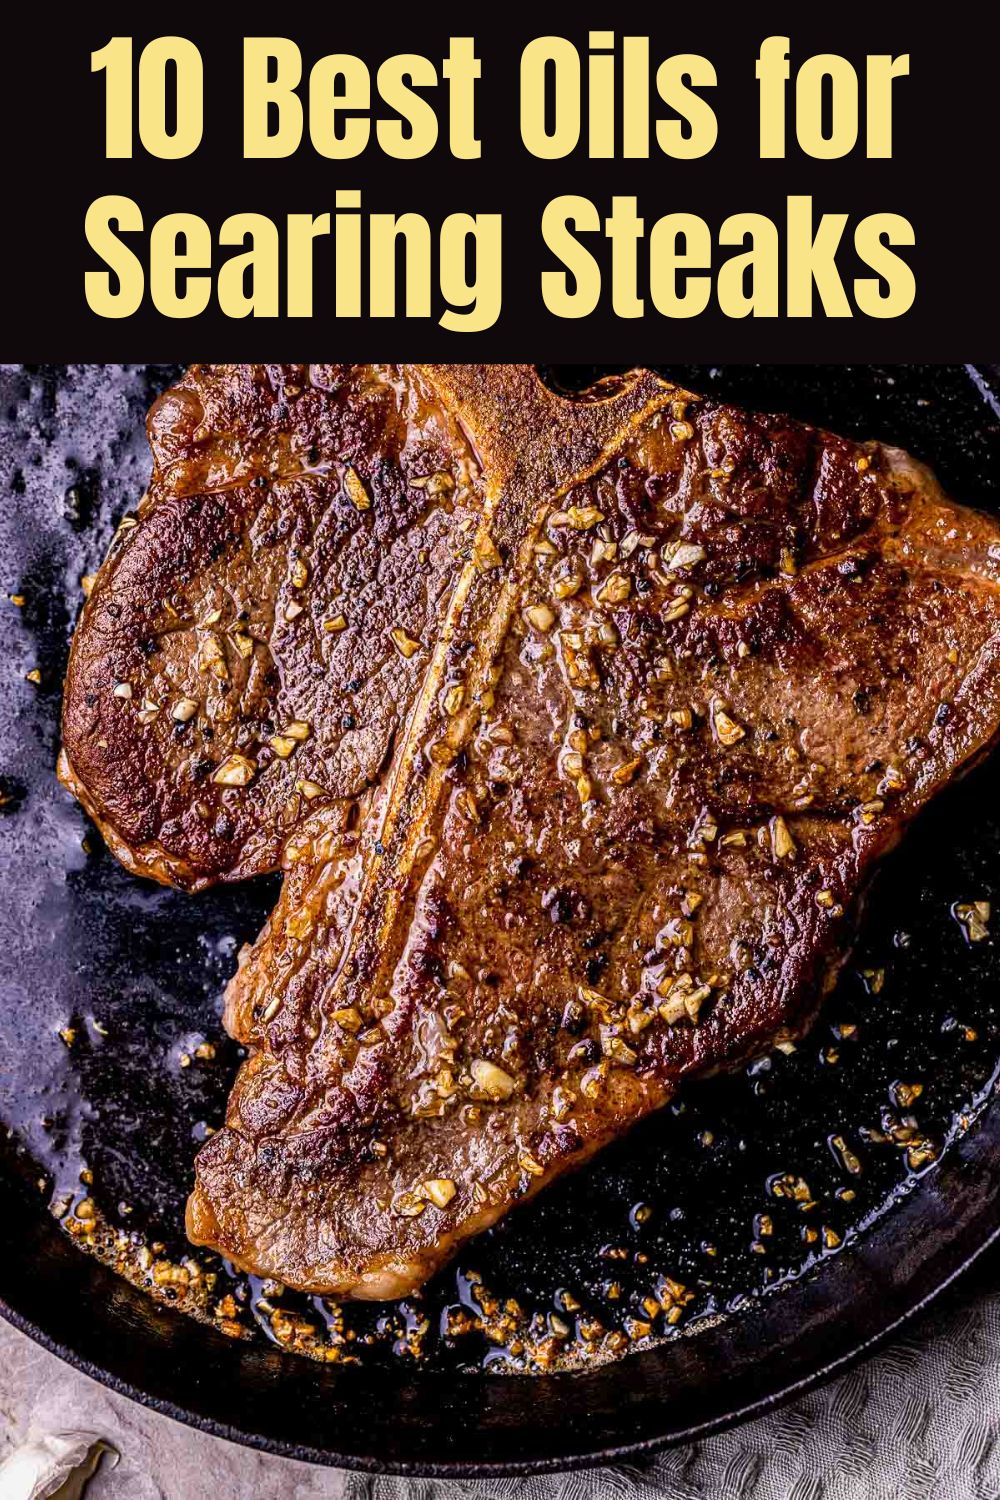 The Best Oils for Searing Steaks